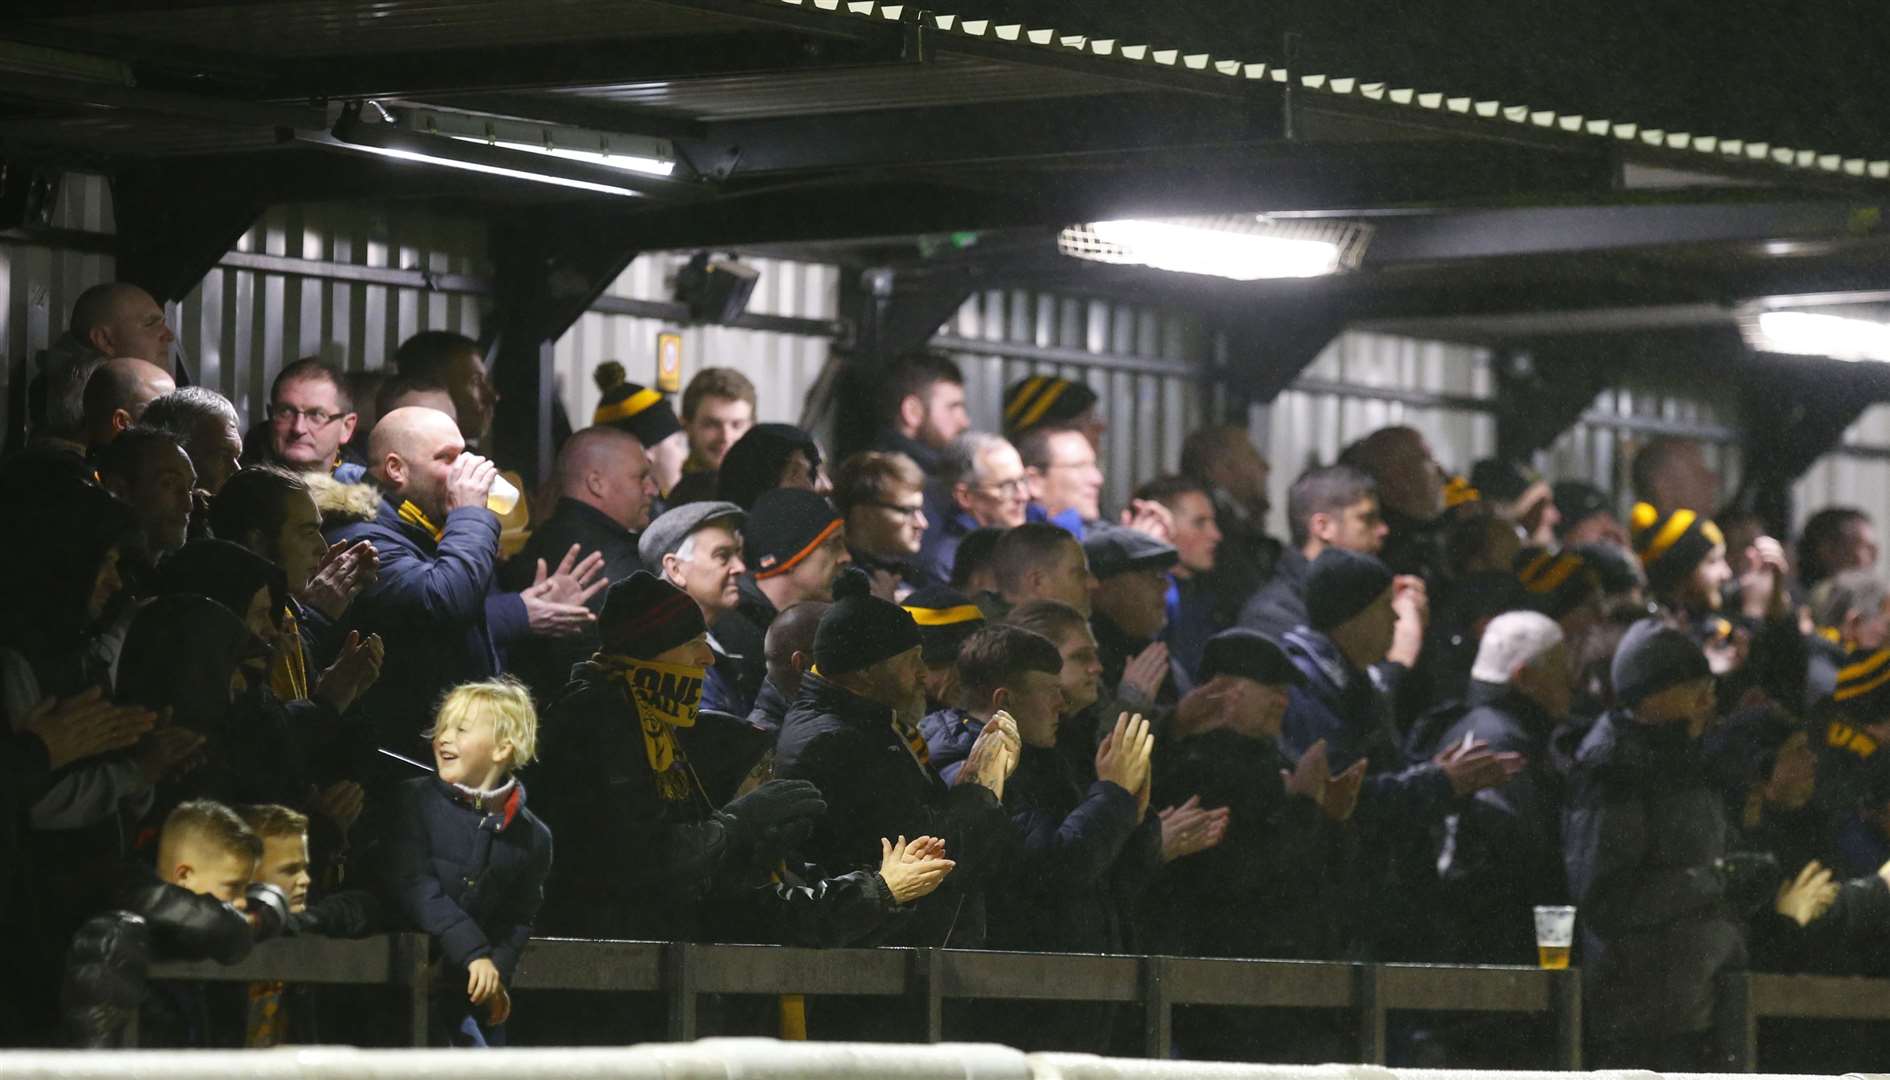 Capacities are expected to be reduced when fans are eventually allowed back into stadiums. Picture: Andy Jones